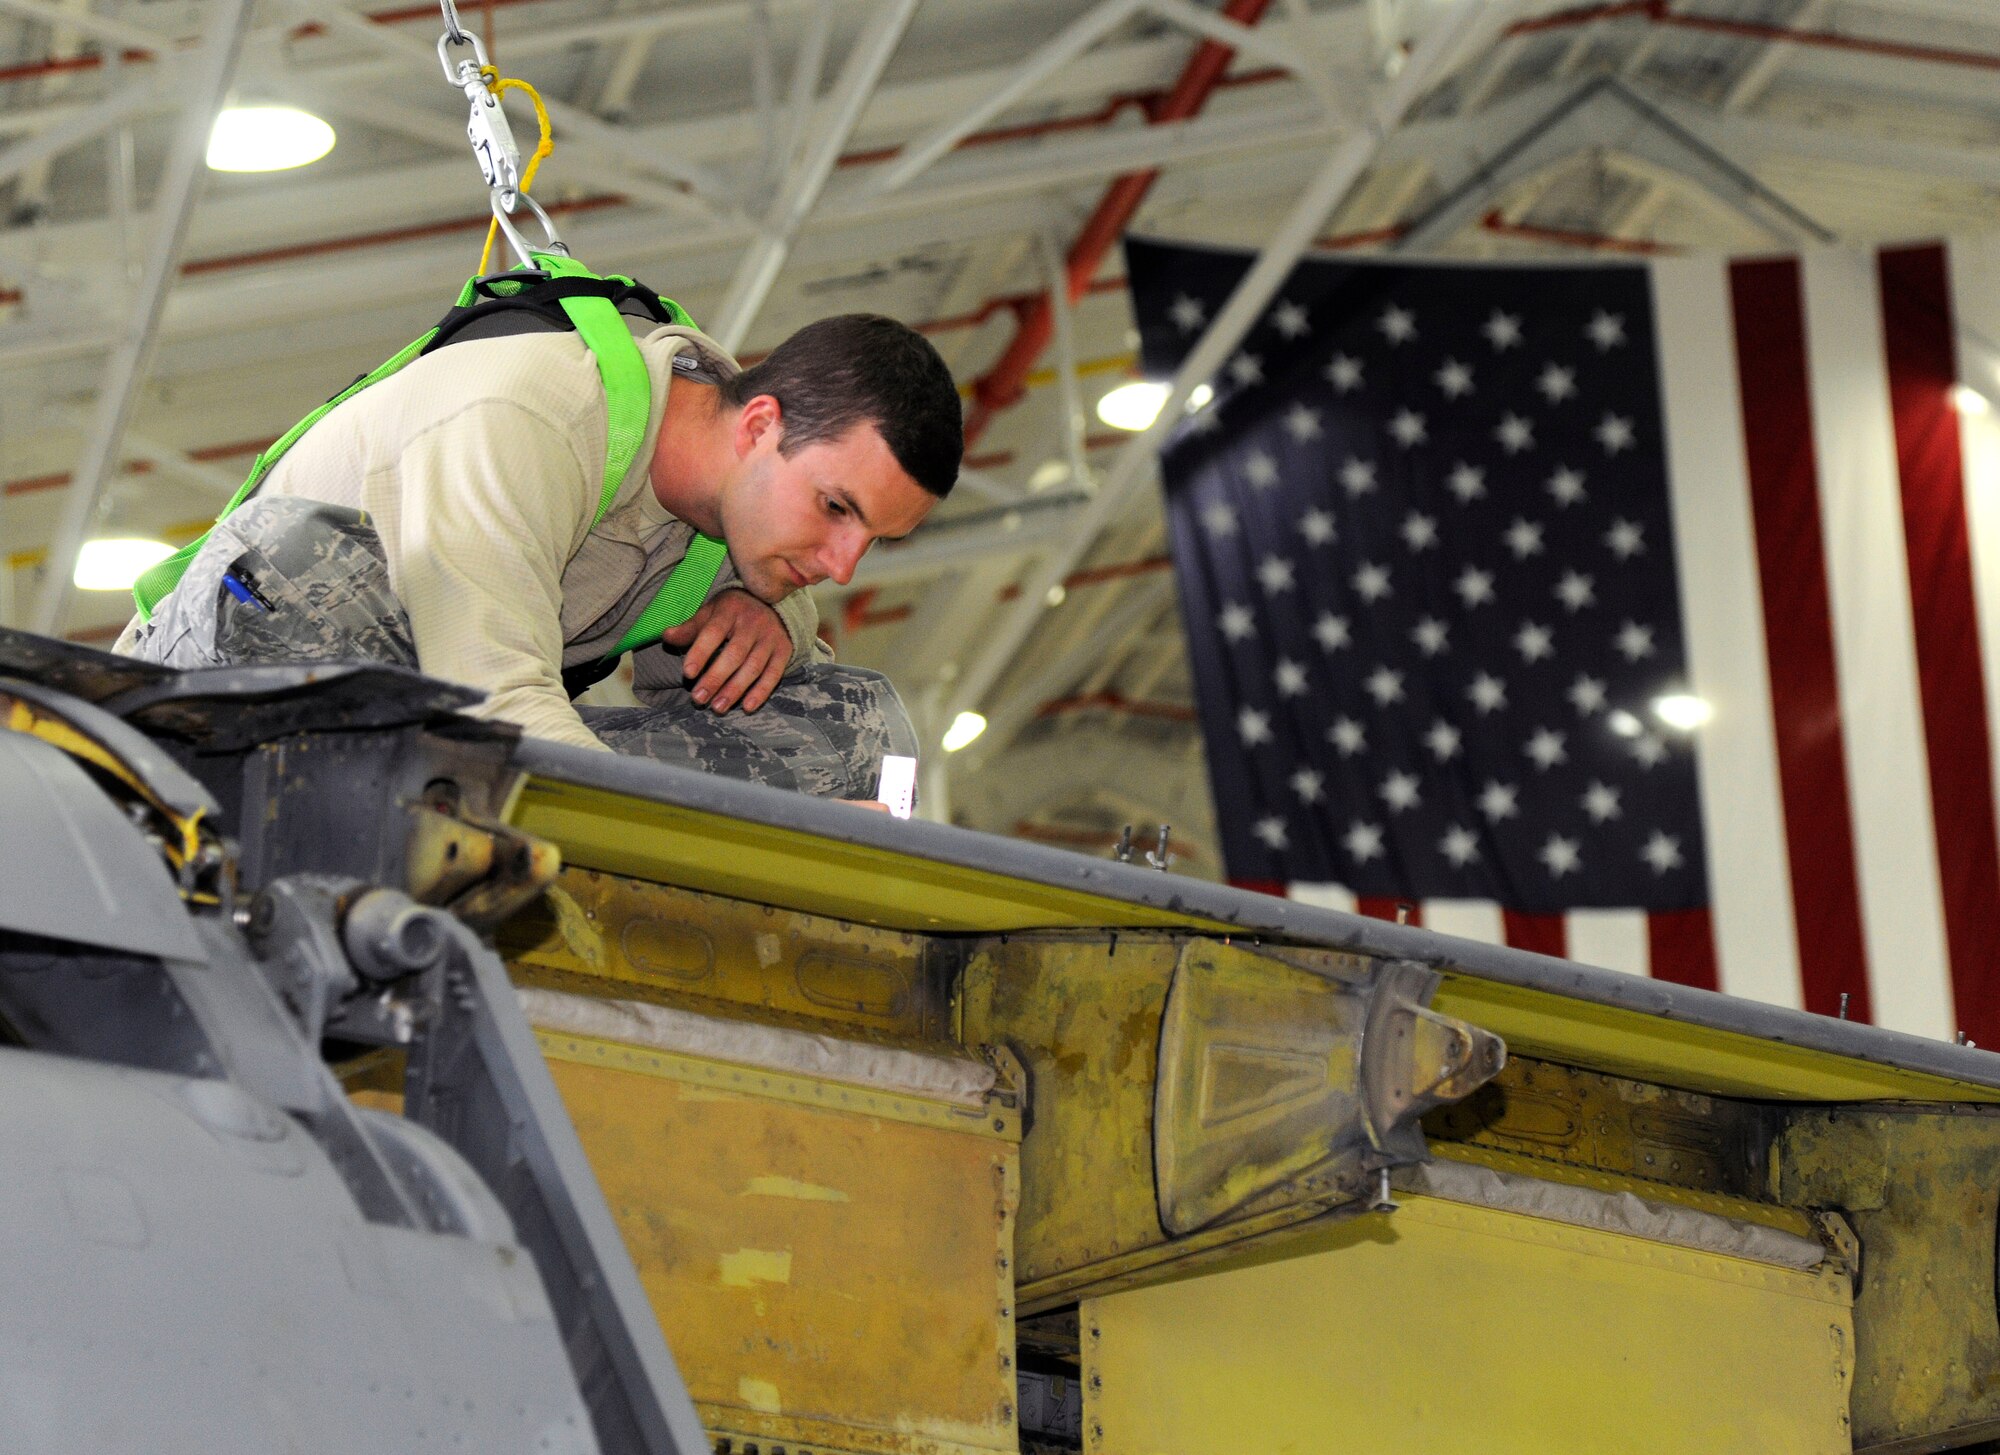 Staff Sgt. Andrew Depew, 127th Aircraft Maintenance Squadron, aircraft structural maintenance craftsman, repairs a panel on a KC-135 Stratotanker in the hangar at Selfridge Air National Guard Base, Mich., Oct. 18, 2015. Depew is responsible for any structural repairs or maintenance on the KC-135 Stratotanker. (U.S. Air Force photo by Senior Airman Ryan Zeski/Released)